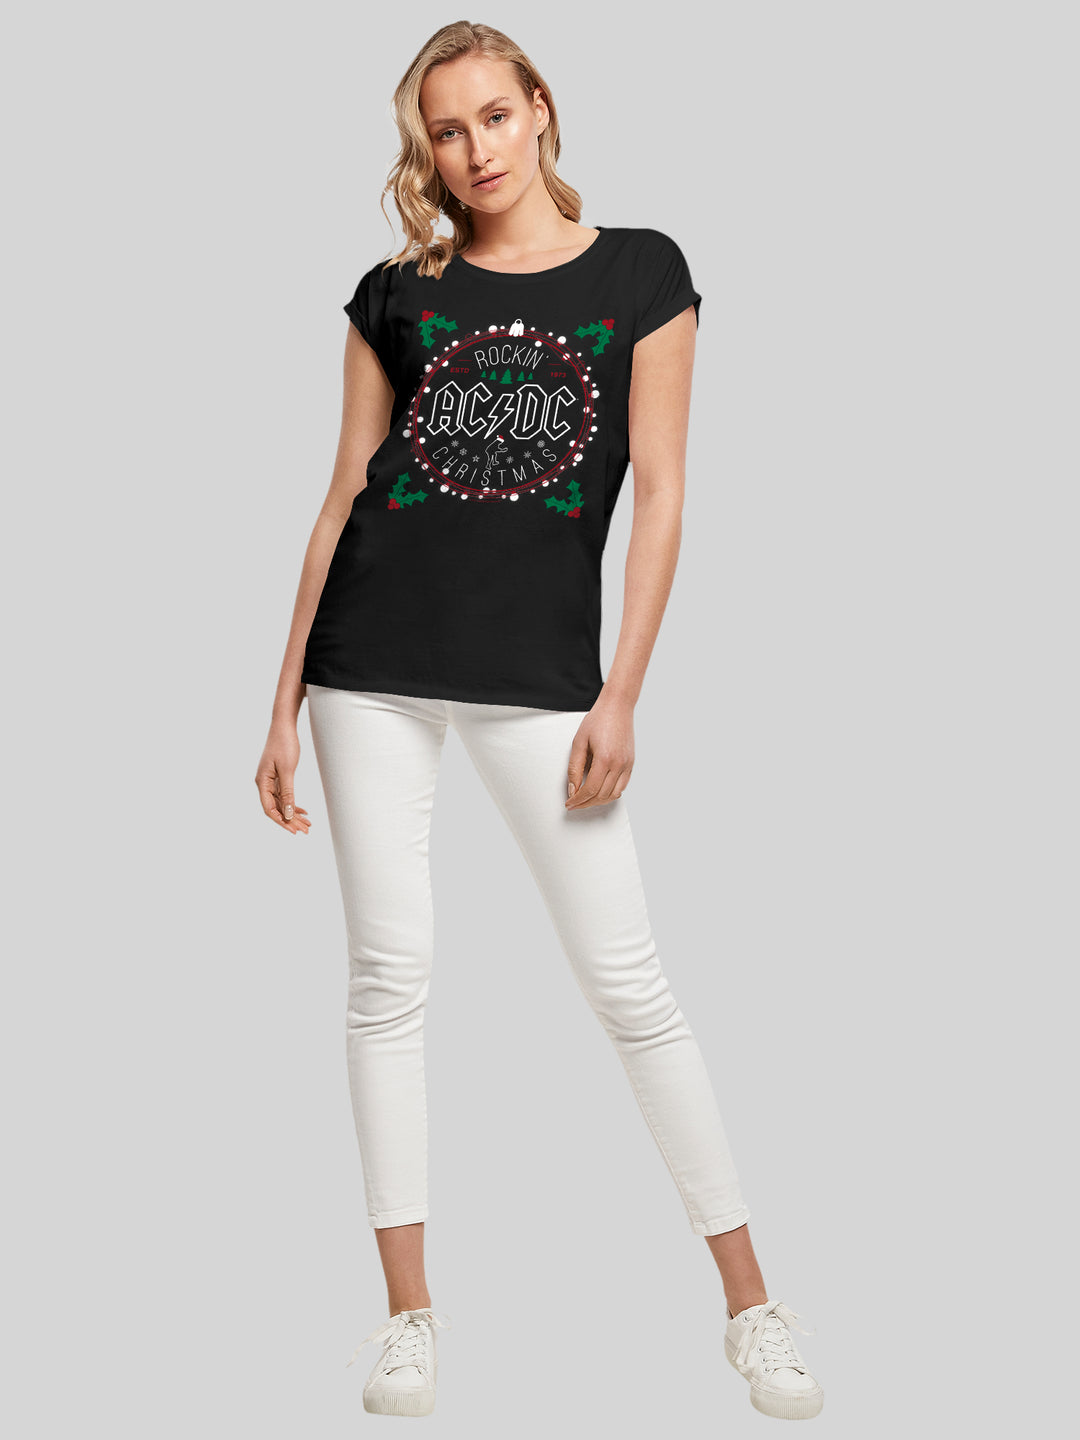 ACDC-Christmas-Circle and ACDC neck print with Ladies Extended Shoulder Tee